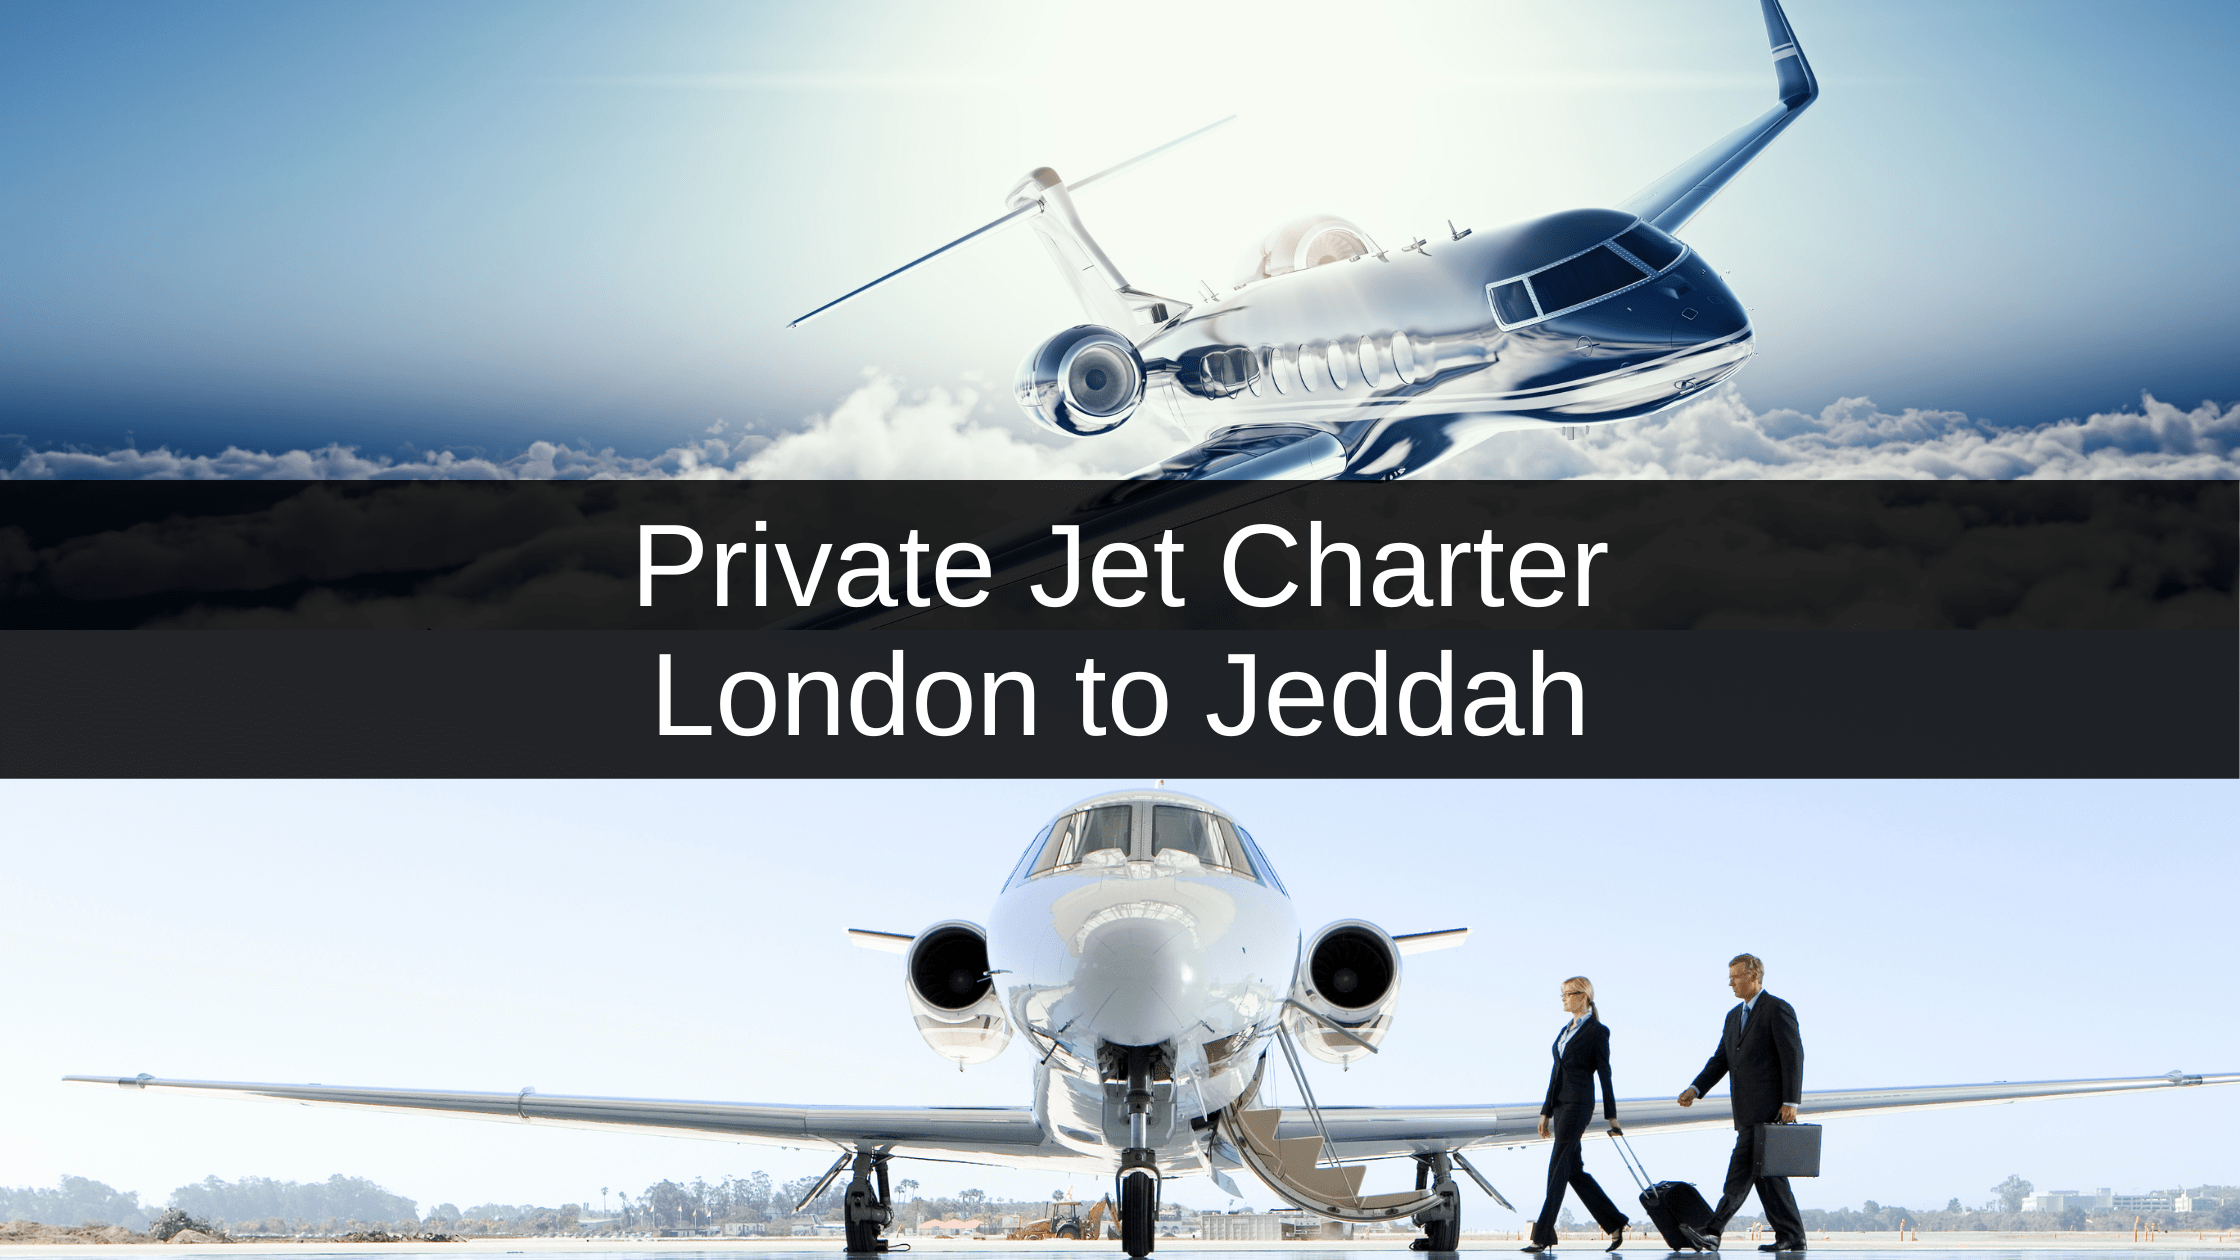 Private Jet Charter from London to Jeddah